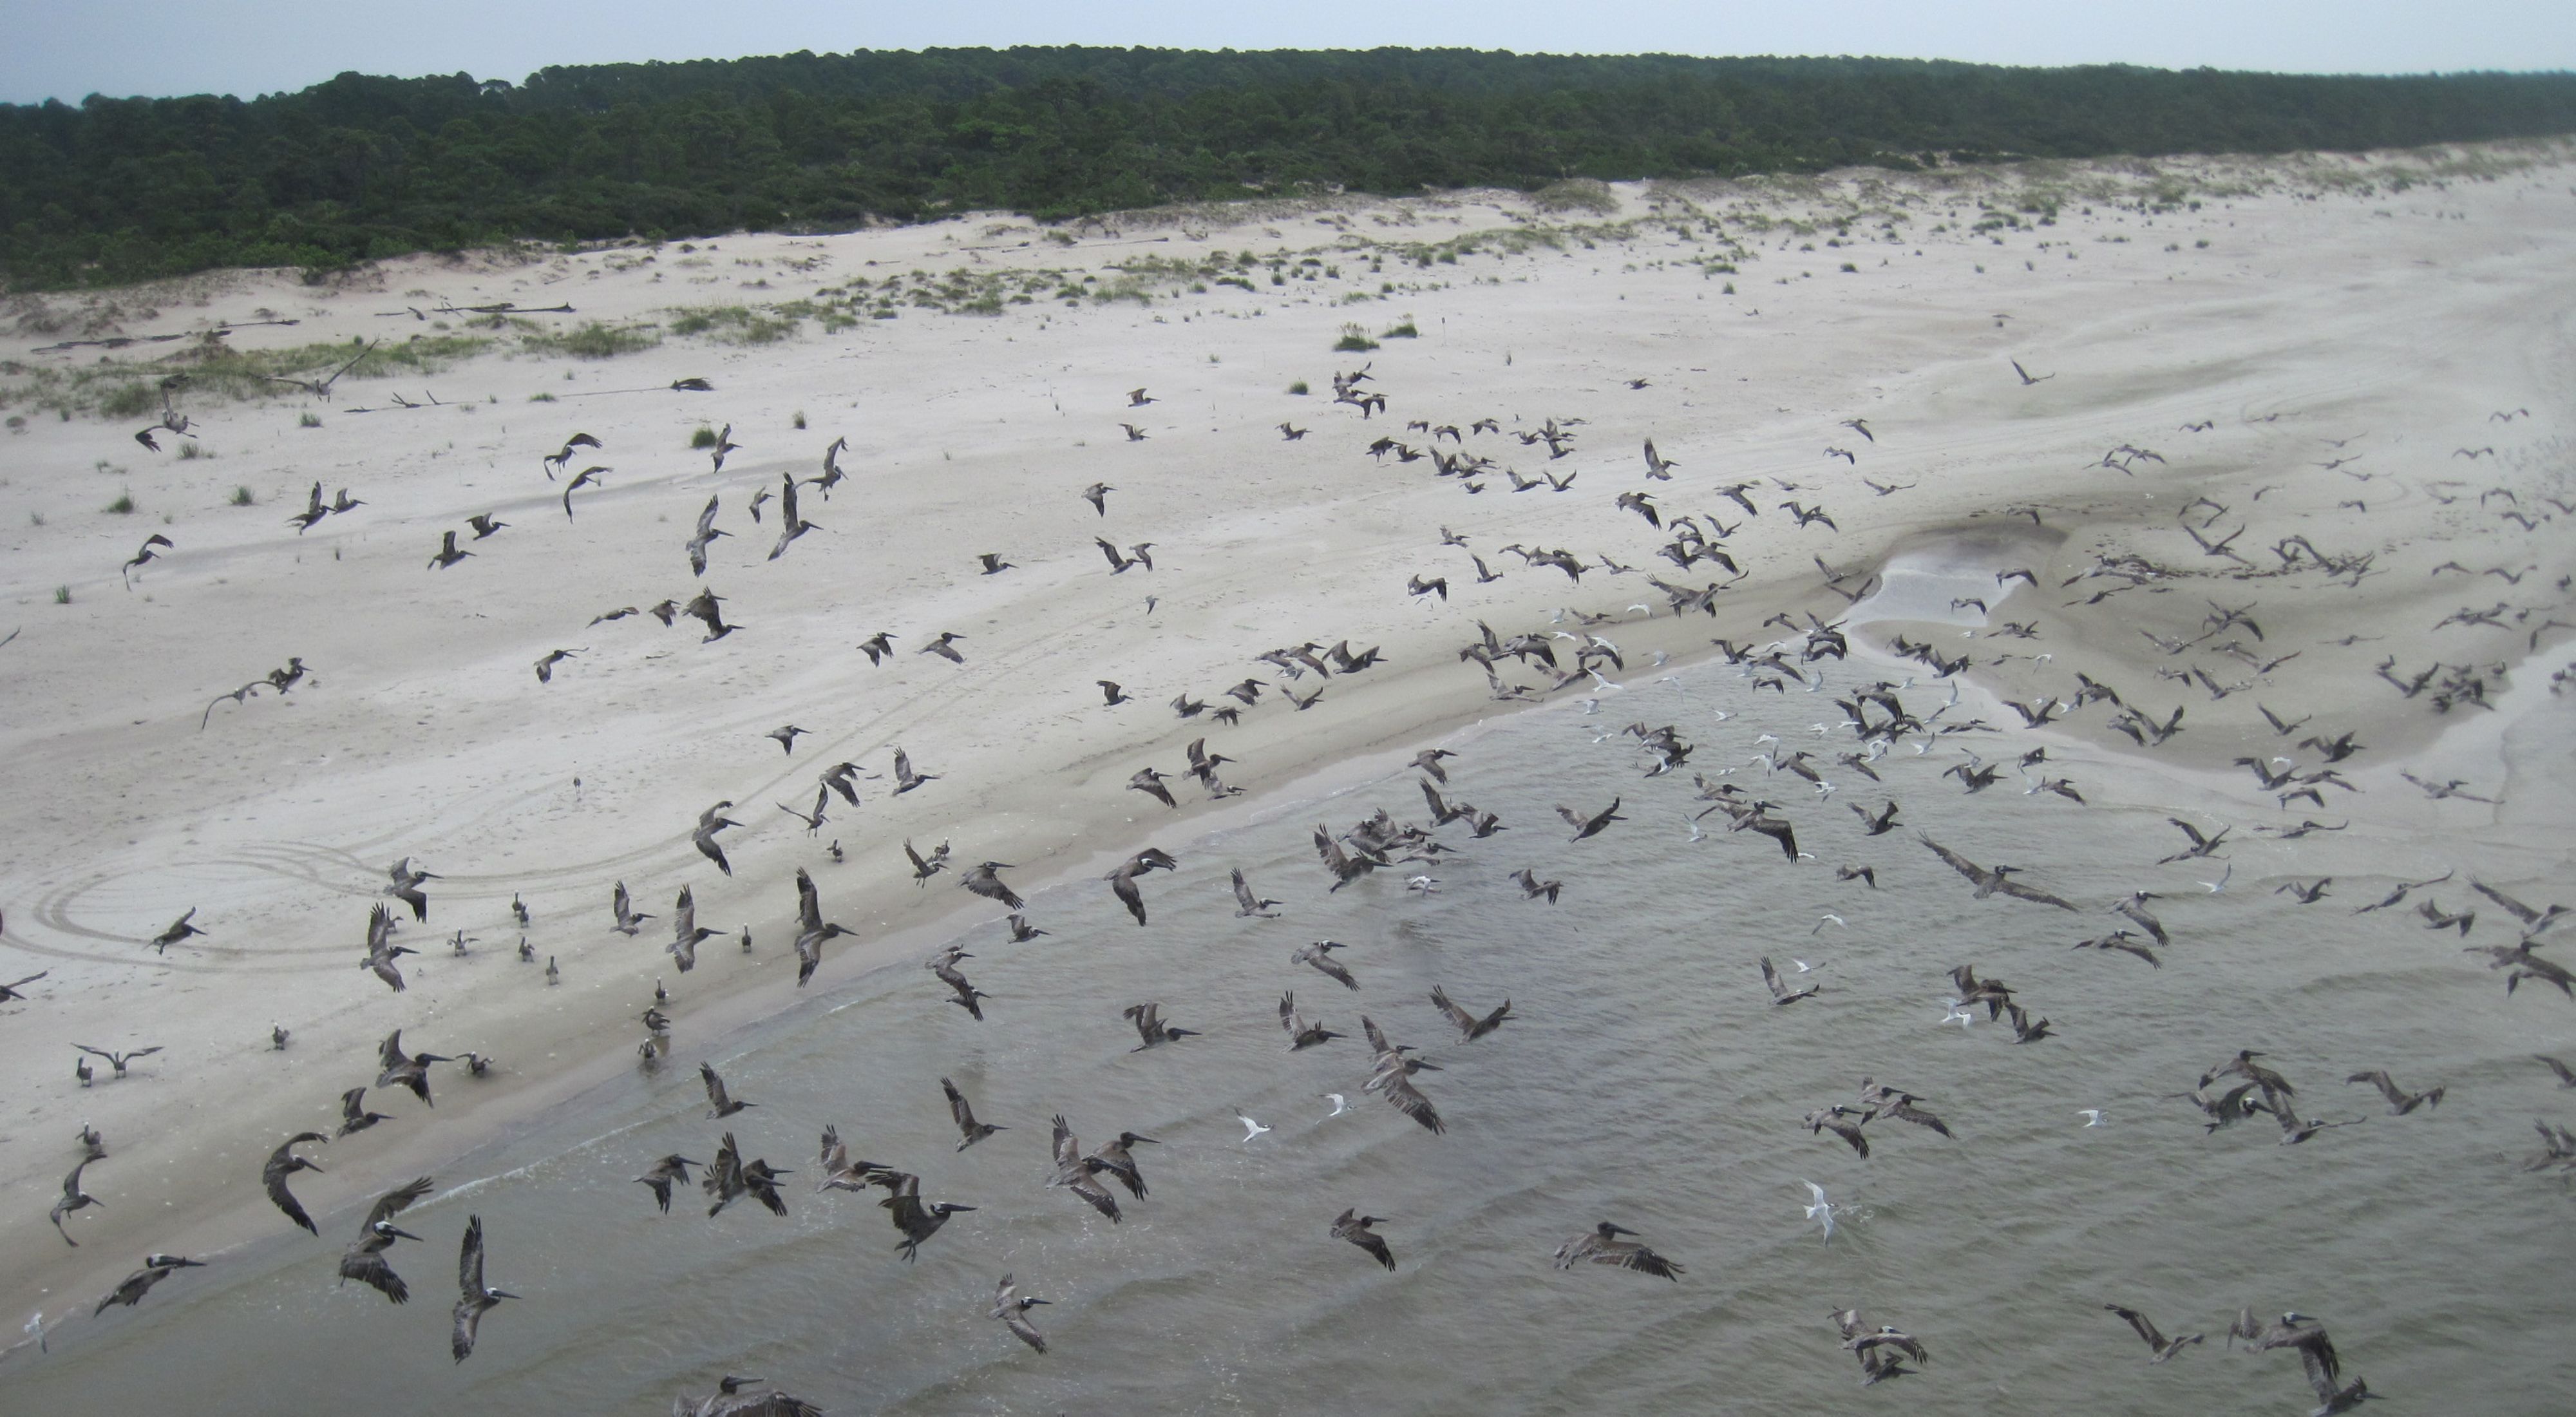 An undeveloped beach with hundreds of pelicans flying over. Trees in the background.